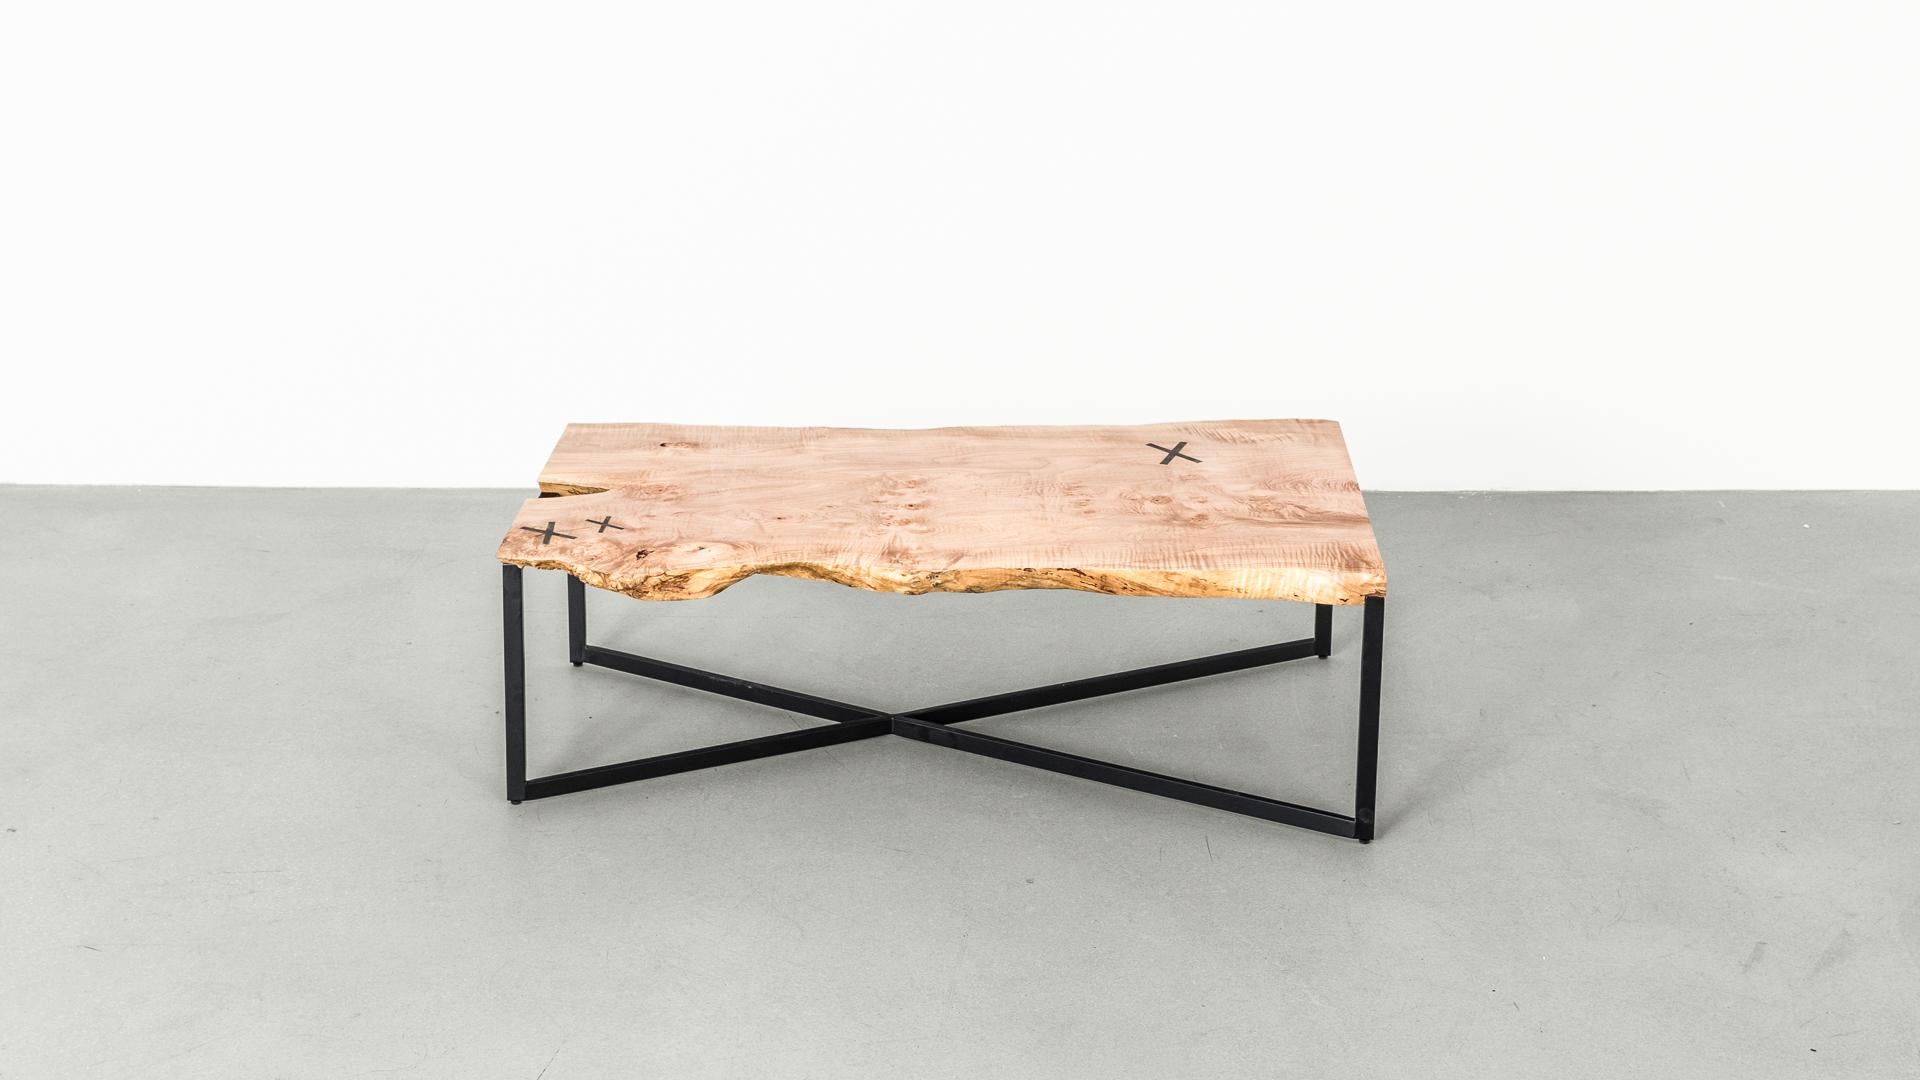 The Stitch coffee table showcases the rich grain of gorgeous Big Leaf Maple slab. Each coffee table embraces walnut's naturally occurring checks, which are reinforced with X-shaped brass stitches. The inset stitches beautifully contrast the tones of